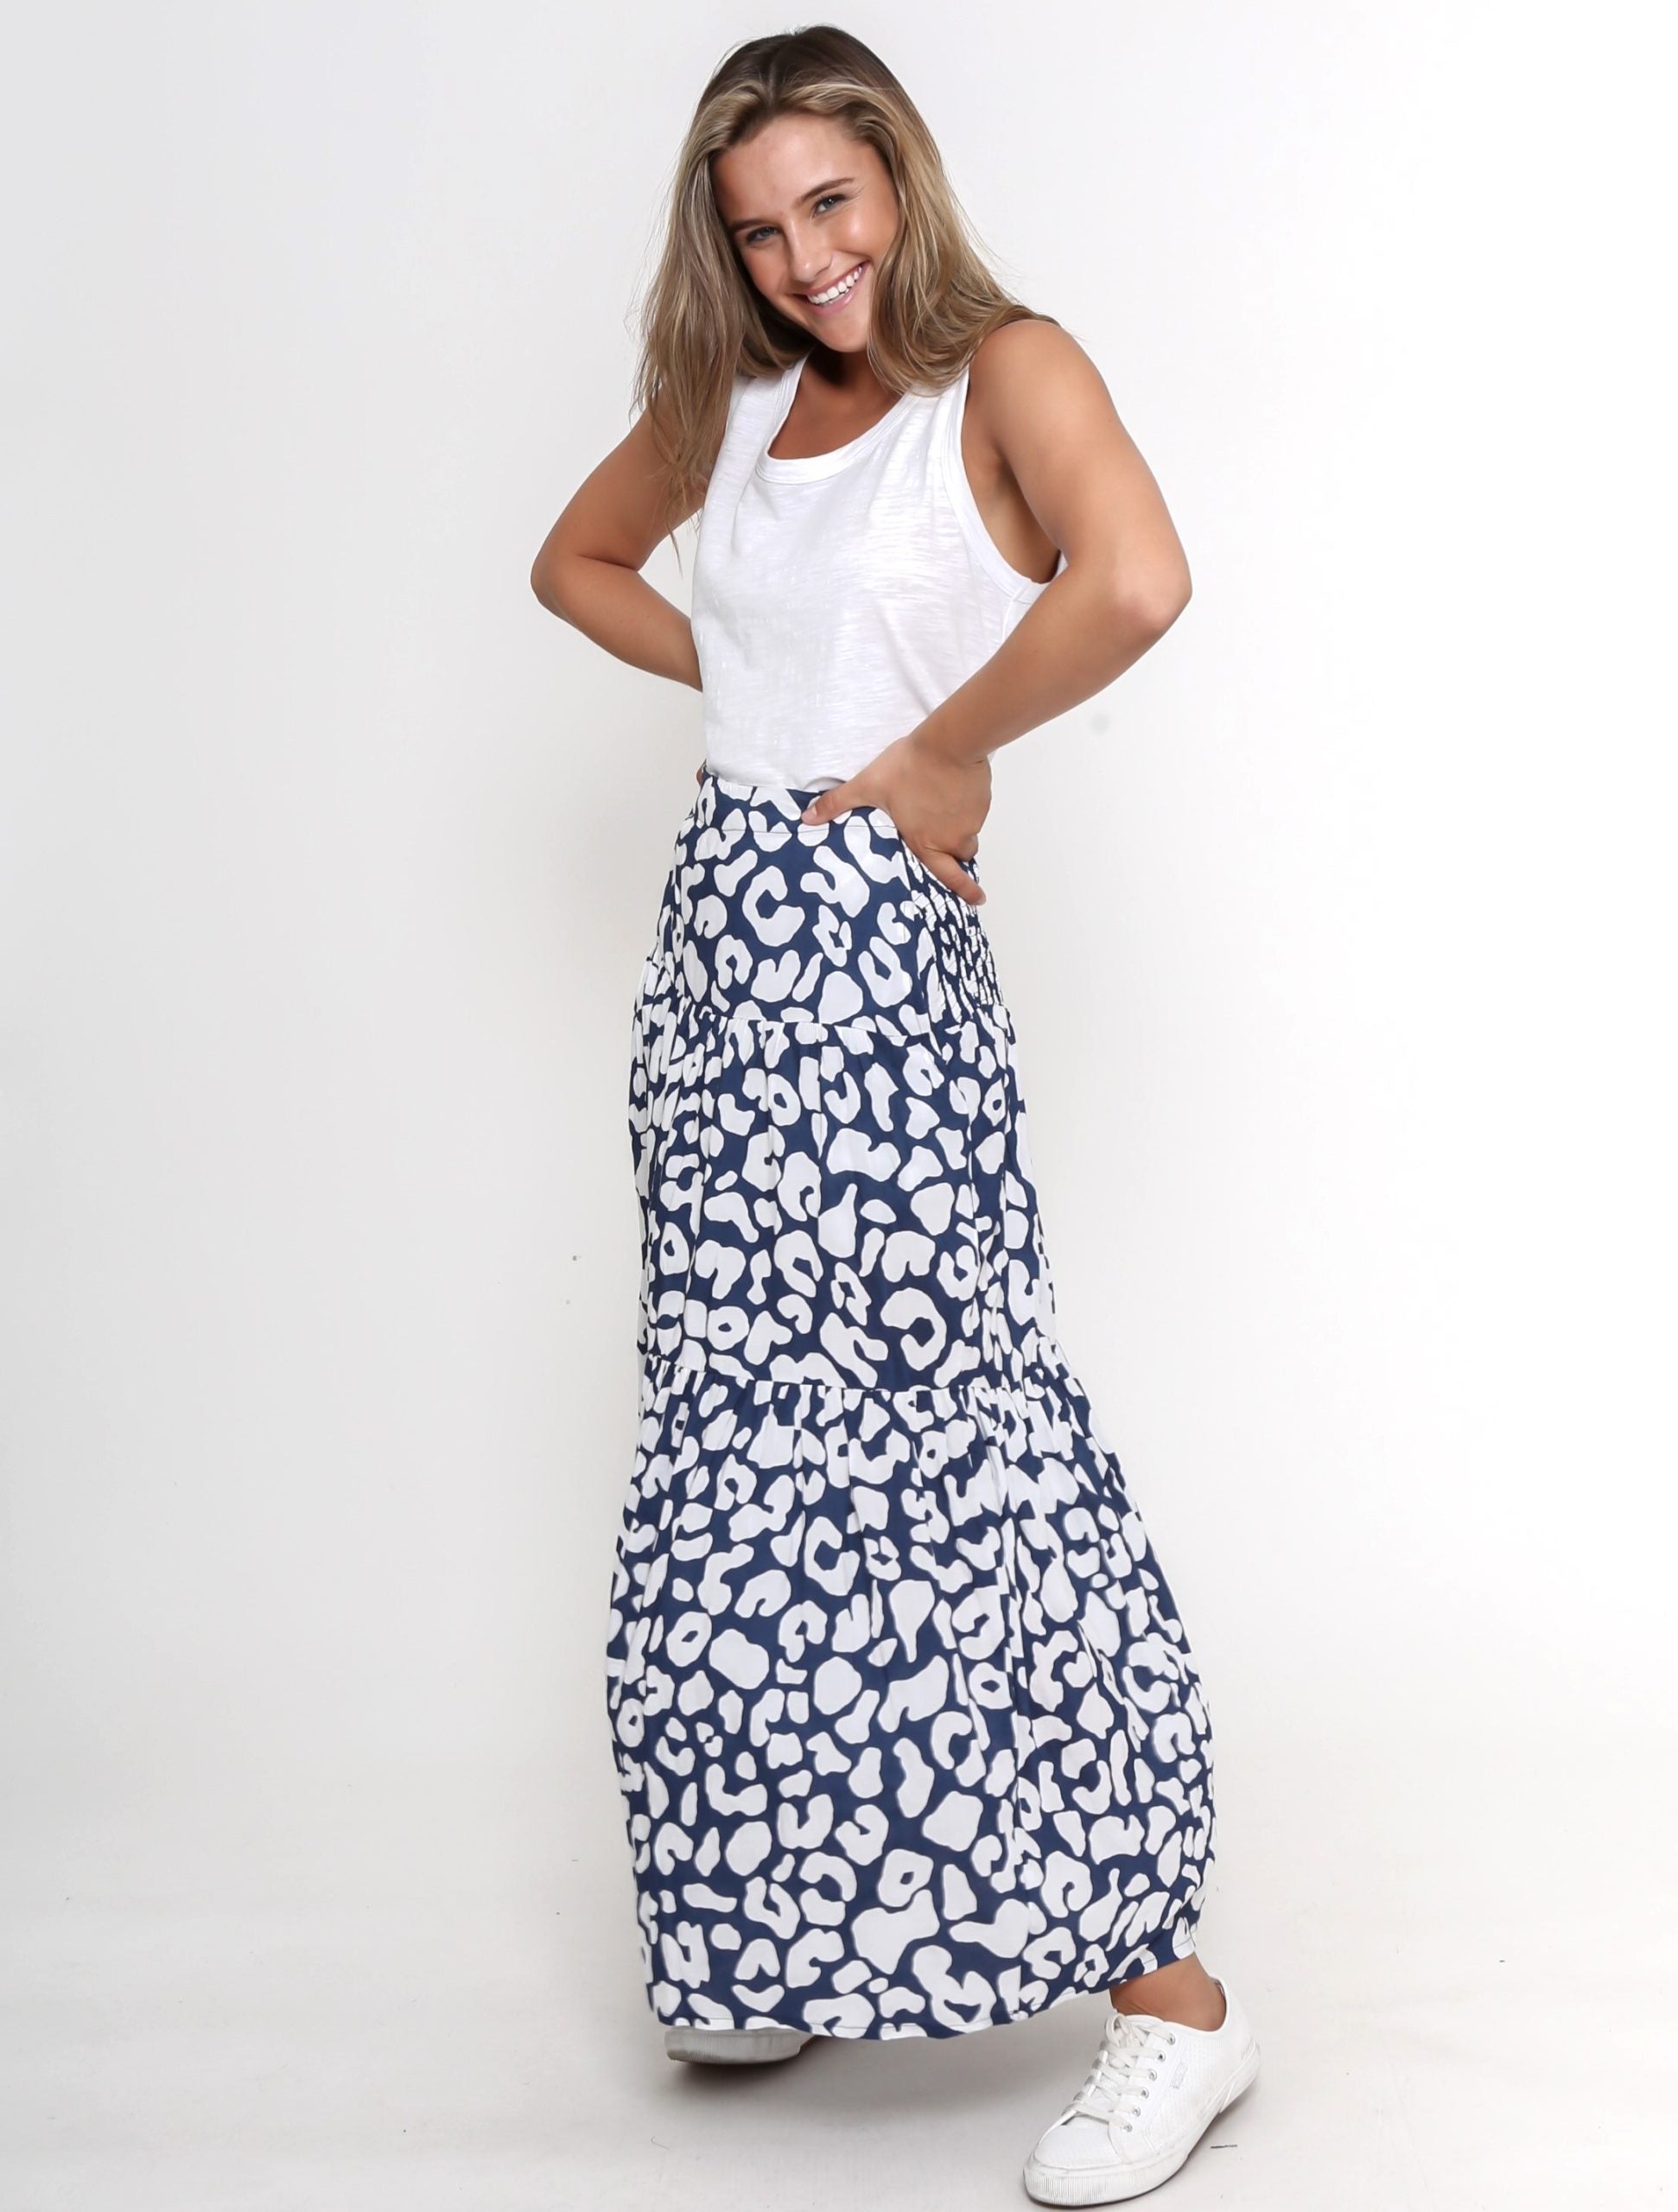 Discover the perfect blend of comfort and elegance with our navy leopard print cotton long skirt. Ideal for any event. Shop now and stand out!